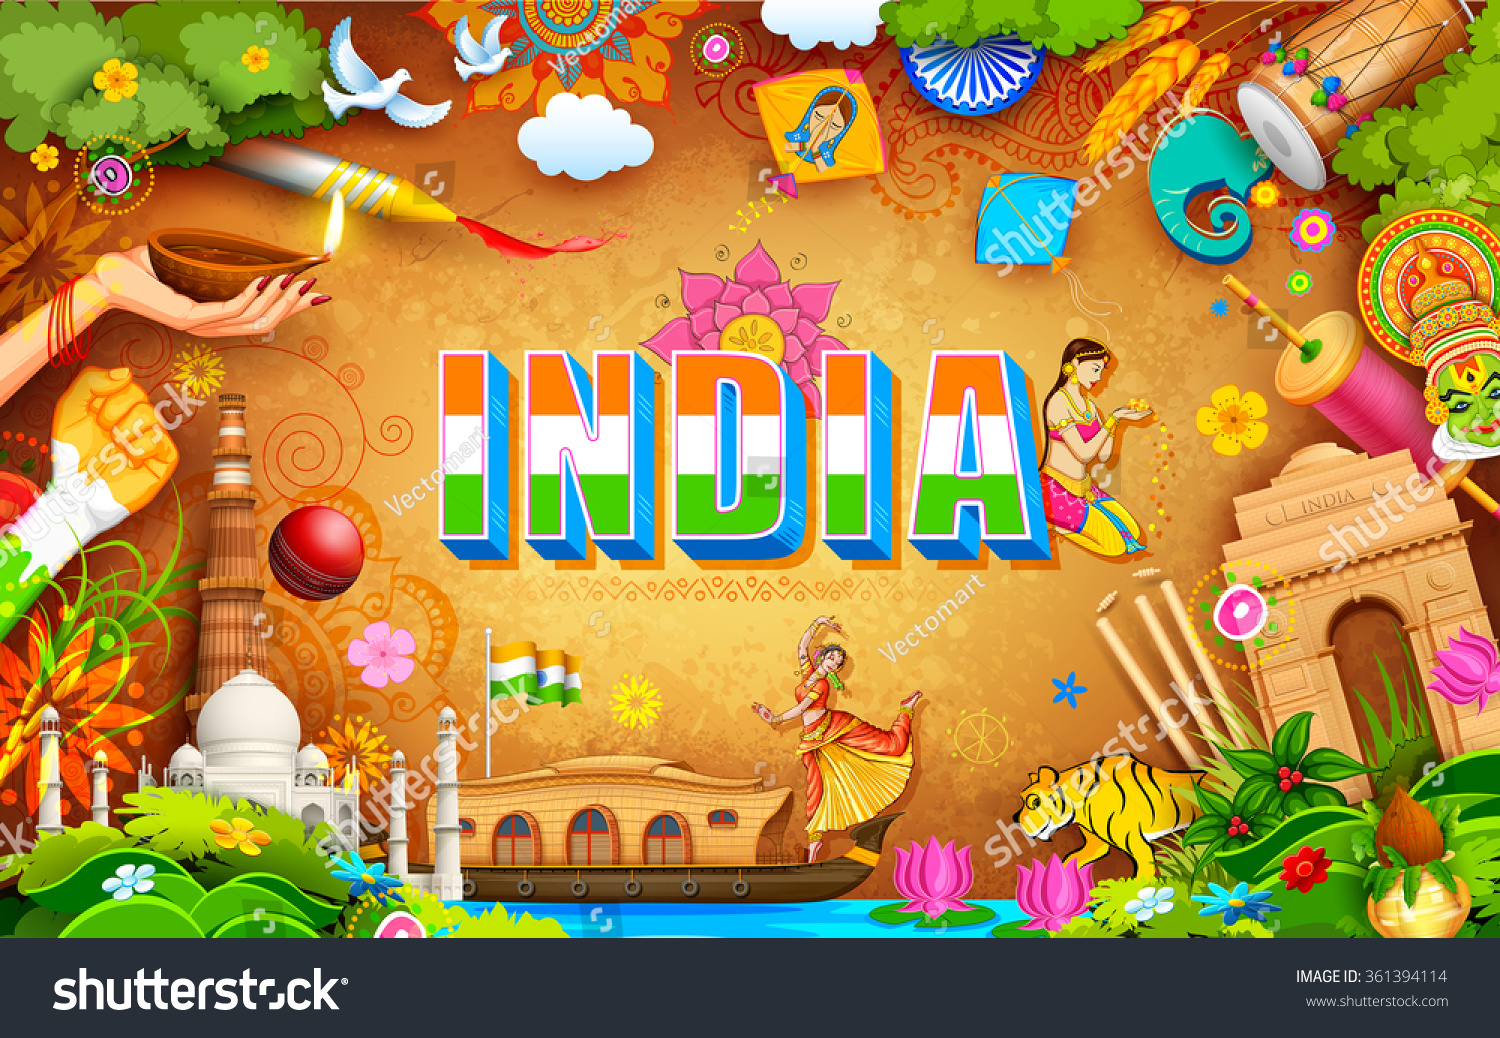 Illustration Of India Background Showing Its Incredible Culture ...